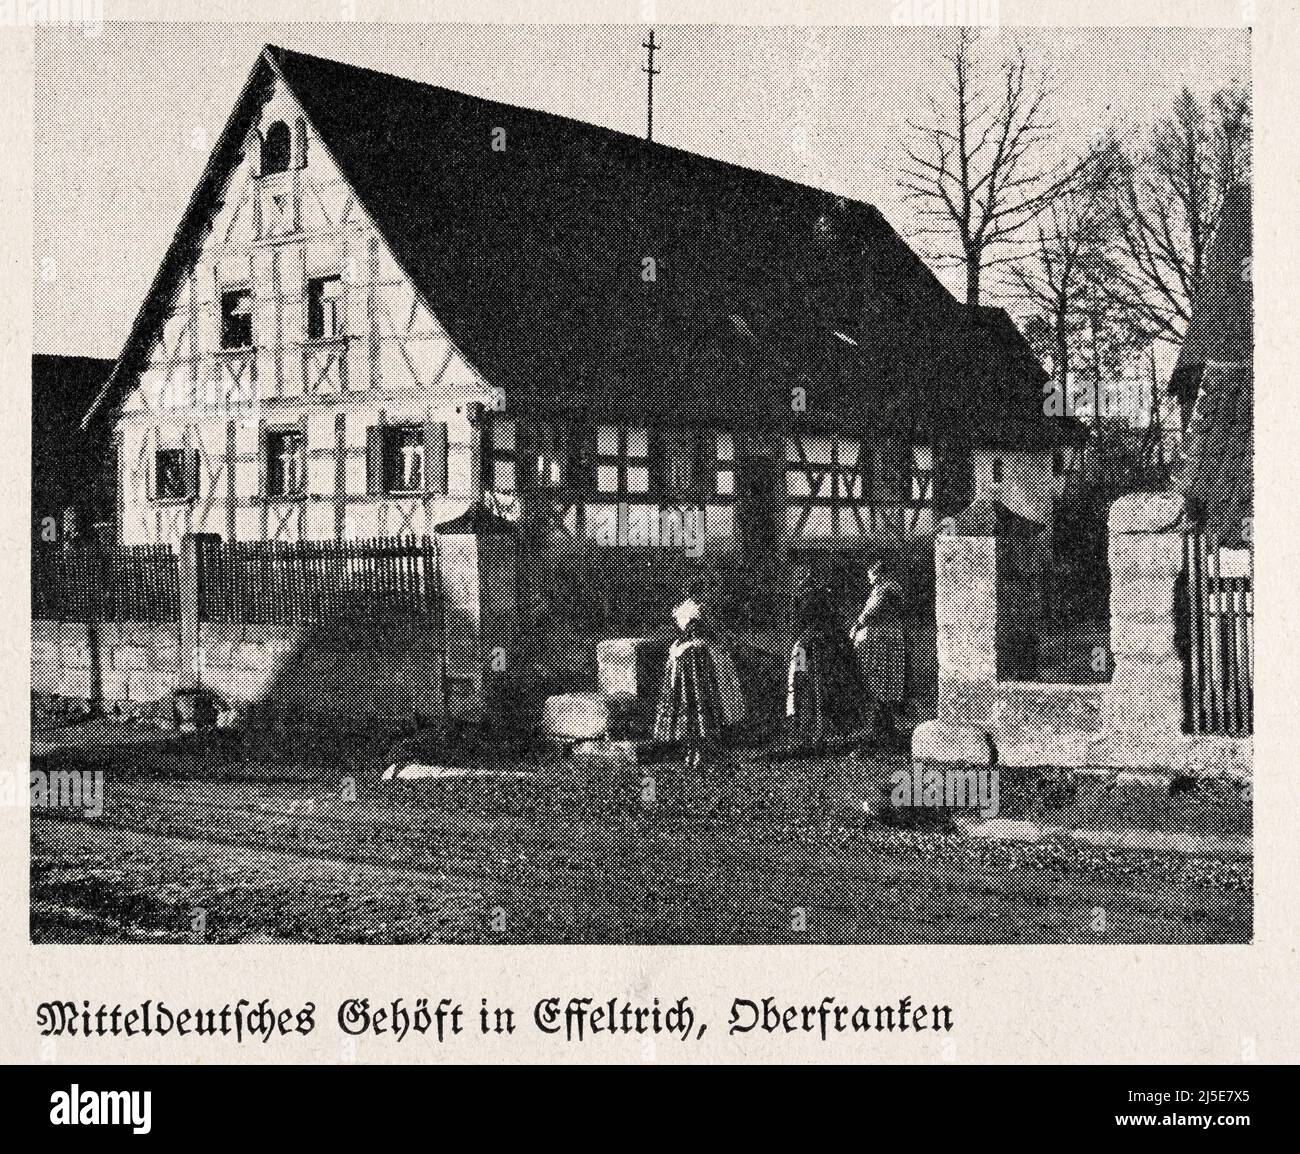 Traditional German house, Vintage photograph, 1930s Oberfranken Germany, Architecture Stock Photo